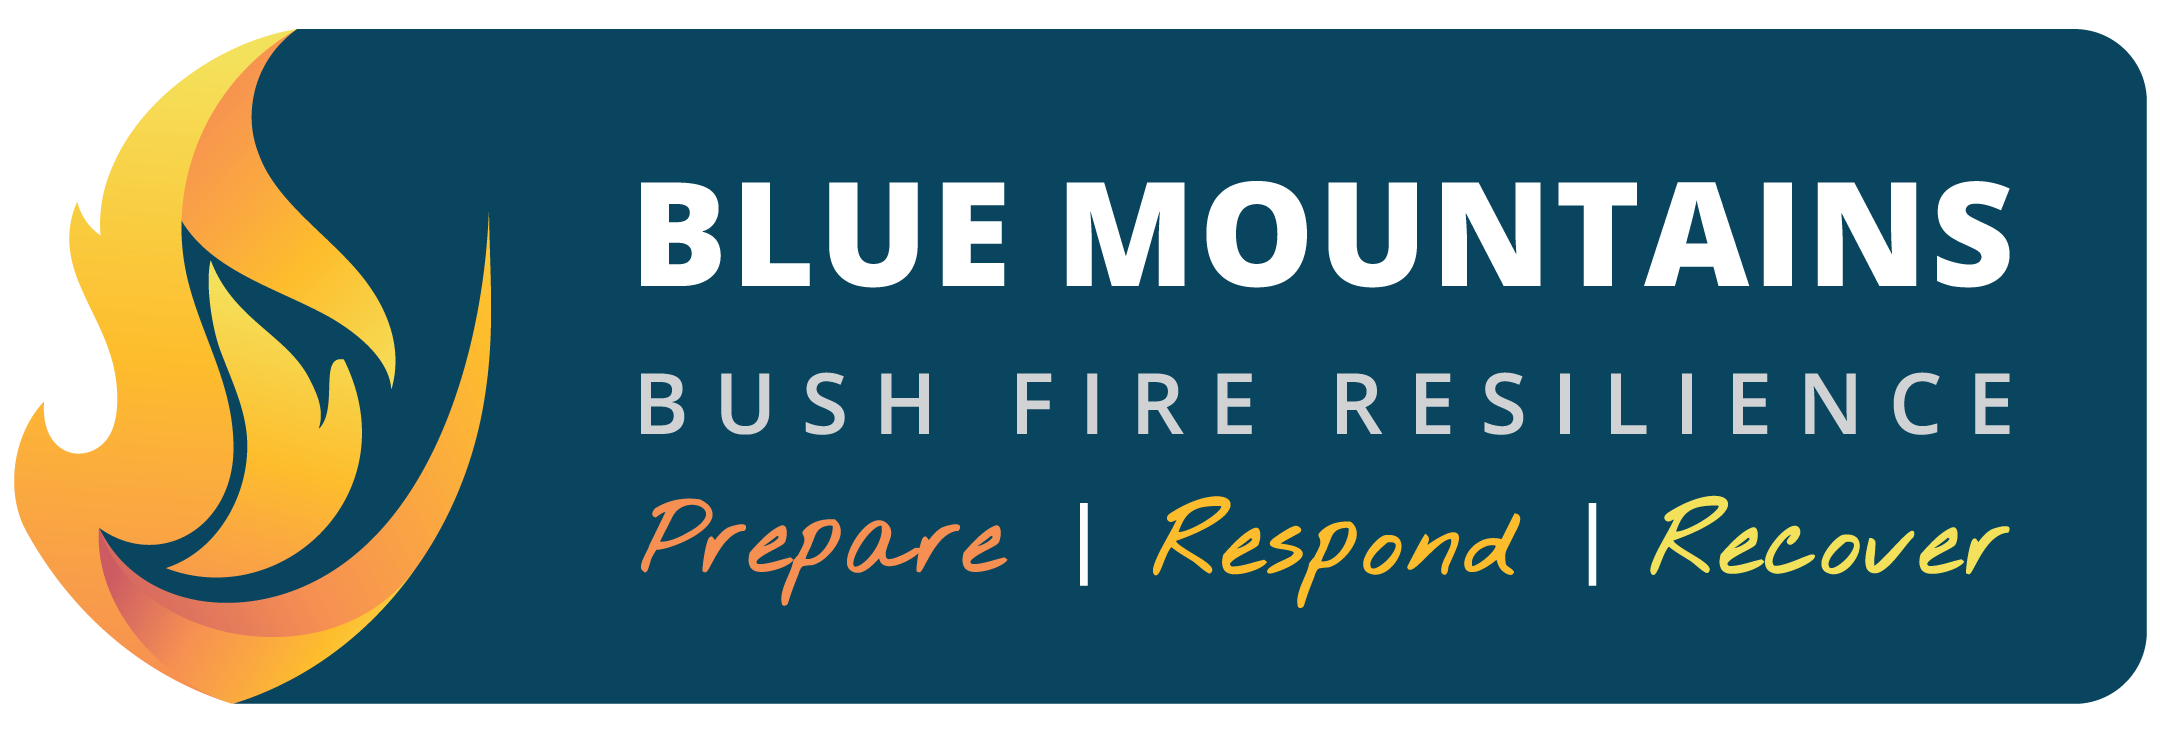 Blue Mountains Bush Fire Resilience